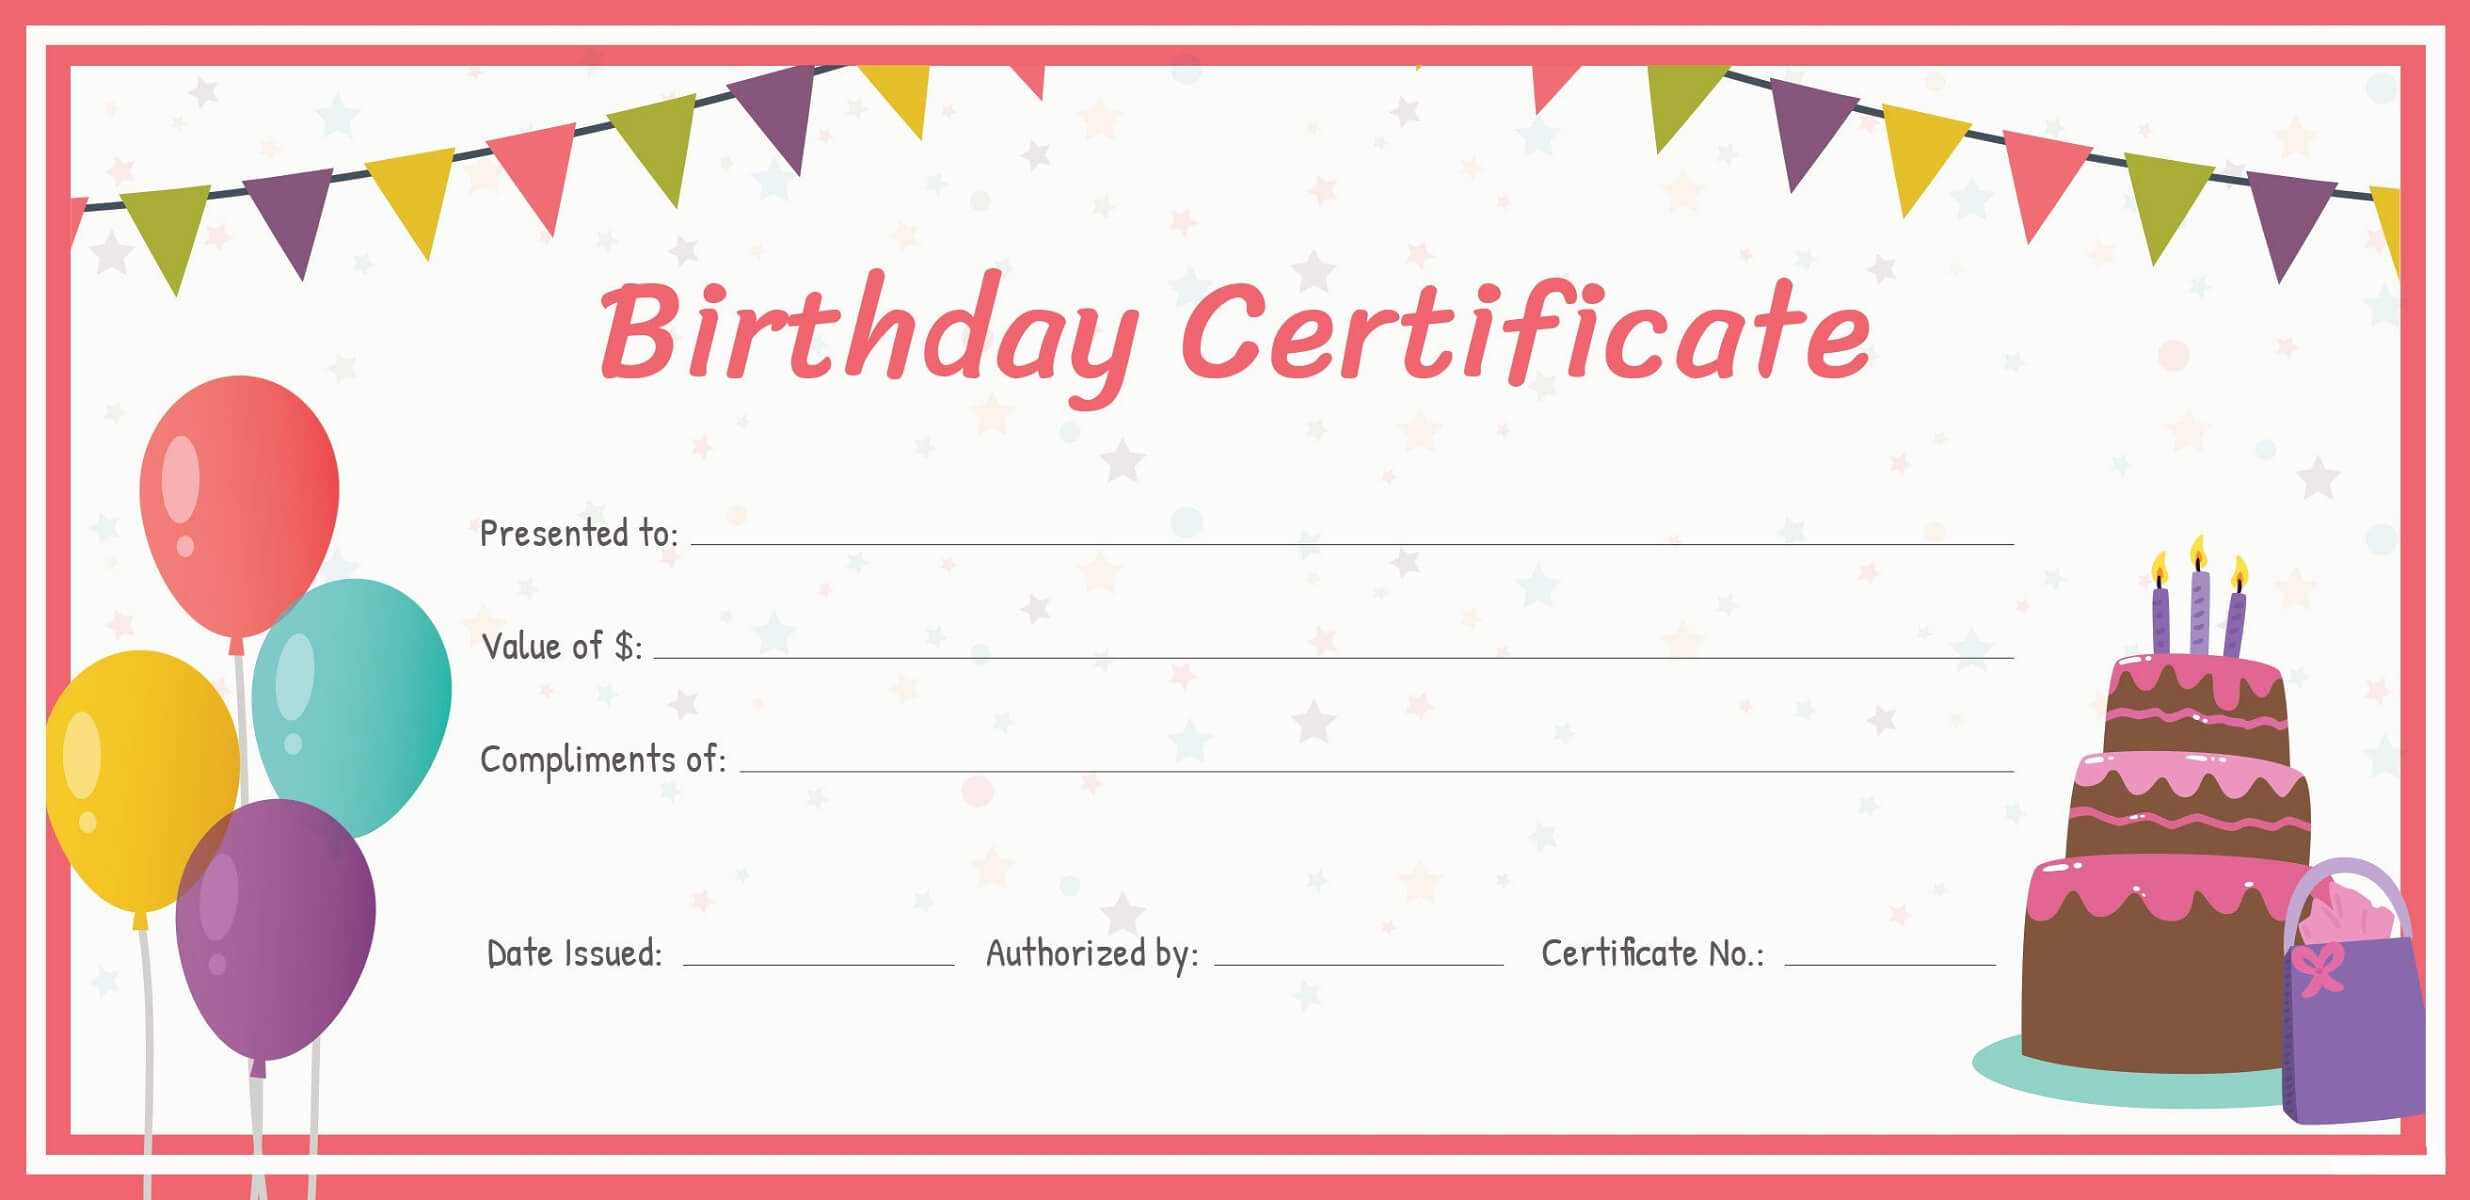 Gift Certificate Templates To Print For Free 101 Activity With Printable Gift Certificates 